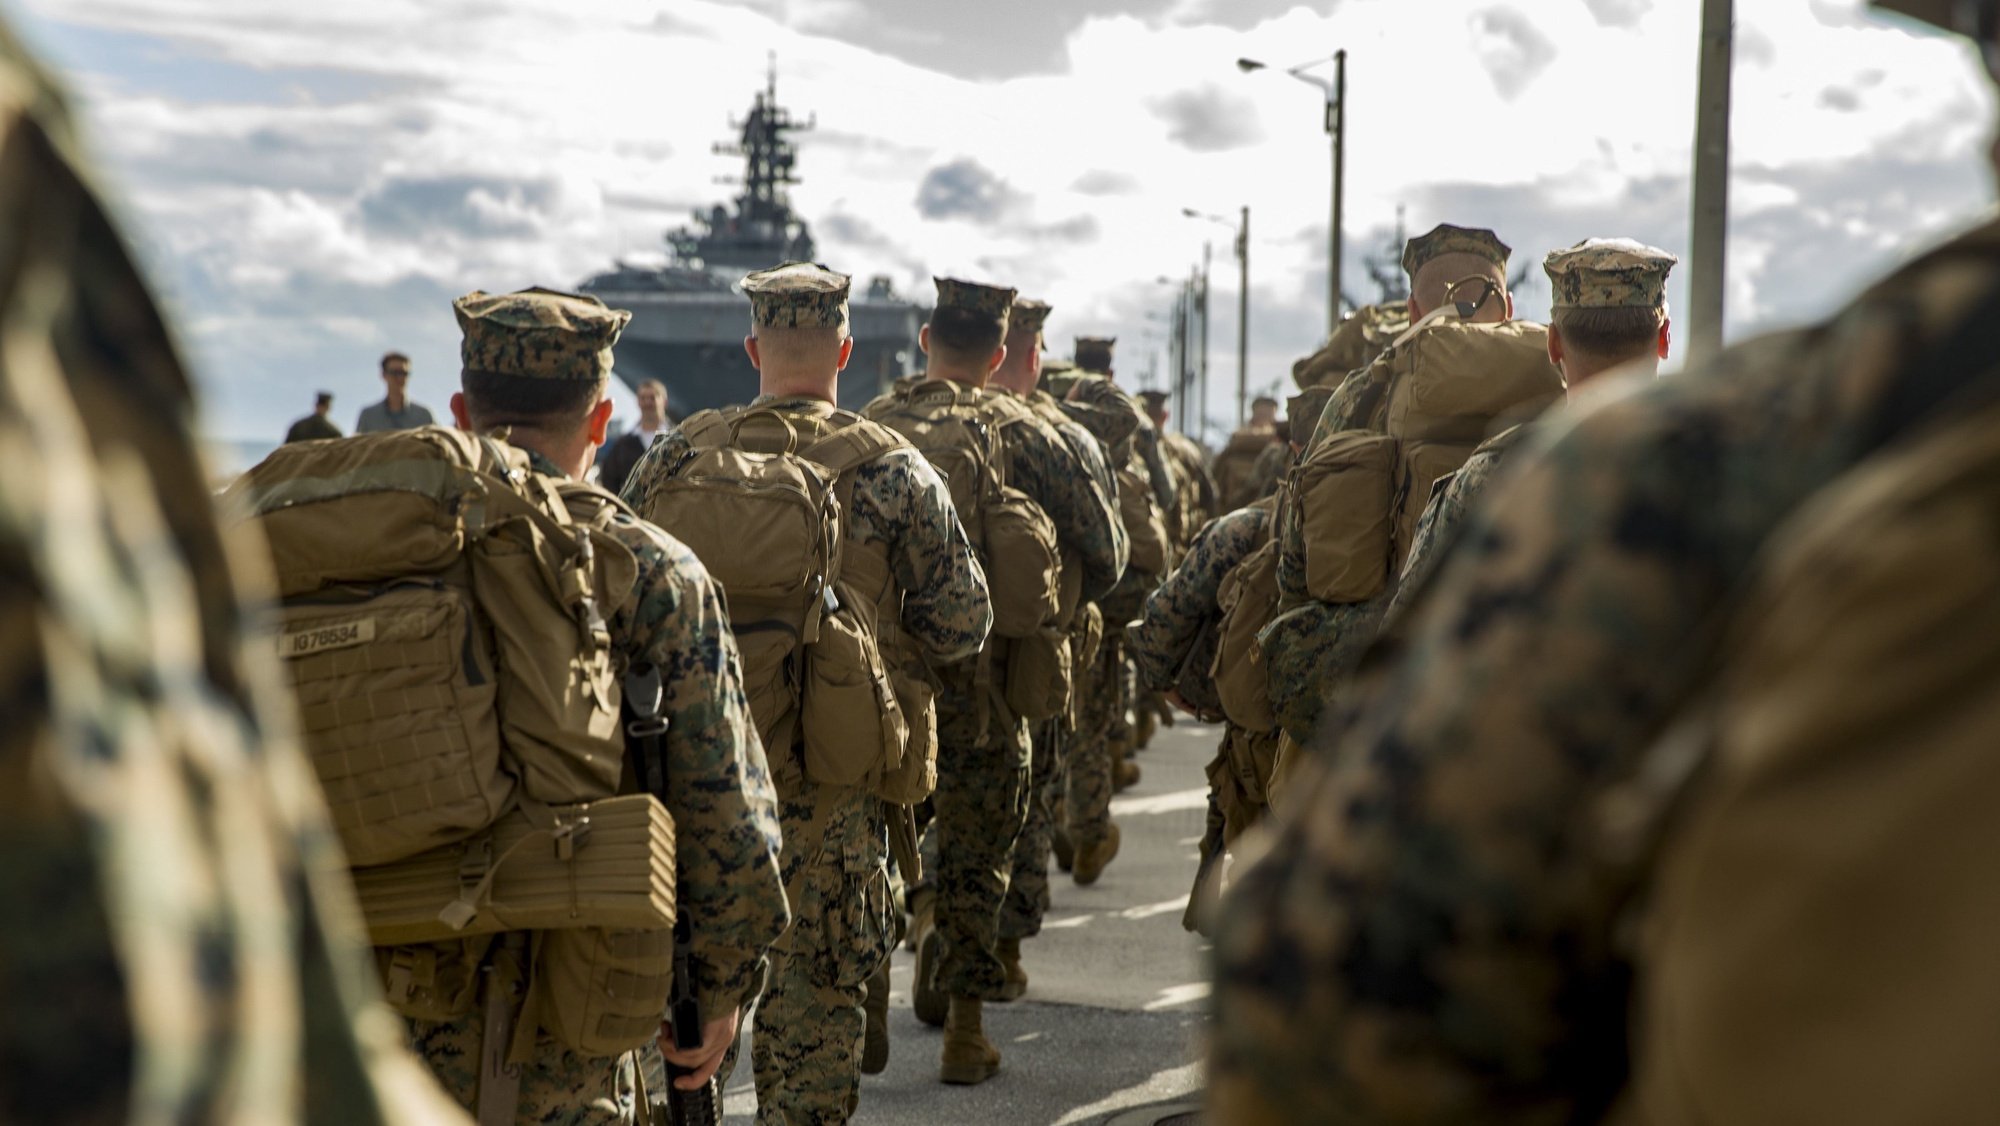 epa06519826 A handout photo made available by the US Marine Corps shows Marines with Headquarters and Service Company, 3rd Battalion, 3rd Marine Regiment, 3rd Marine Division, march on the pier towards the amphibious assault ship USS Bonhomme Richard (LHD-6) in Okinawa, Japan, 01 February 2018 (issued 13 February 2018). The Marines are preparing to embark on the USS Bonhomme Richard going to Thailand to participate in Exercise Cobra Gold 2018. Cobra Gold 18 is an annual exercise conducted in the Kingdom of Thailand and runs from 13 to 23 February, with seven full participating nations.  EPA/SGT. RICKY GOMEZ / HANDOUT  HANDOUT EDITORIAL USE ONLY/NO SALES